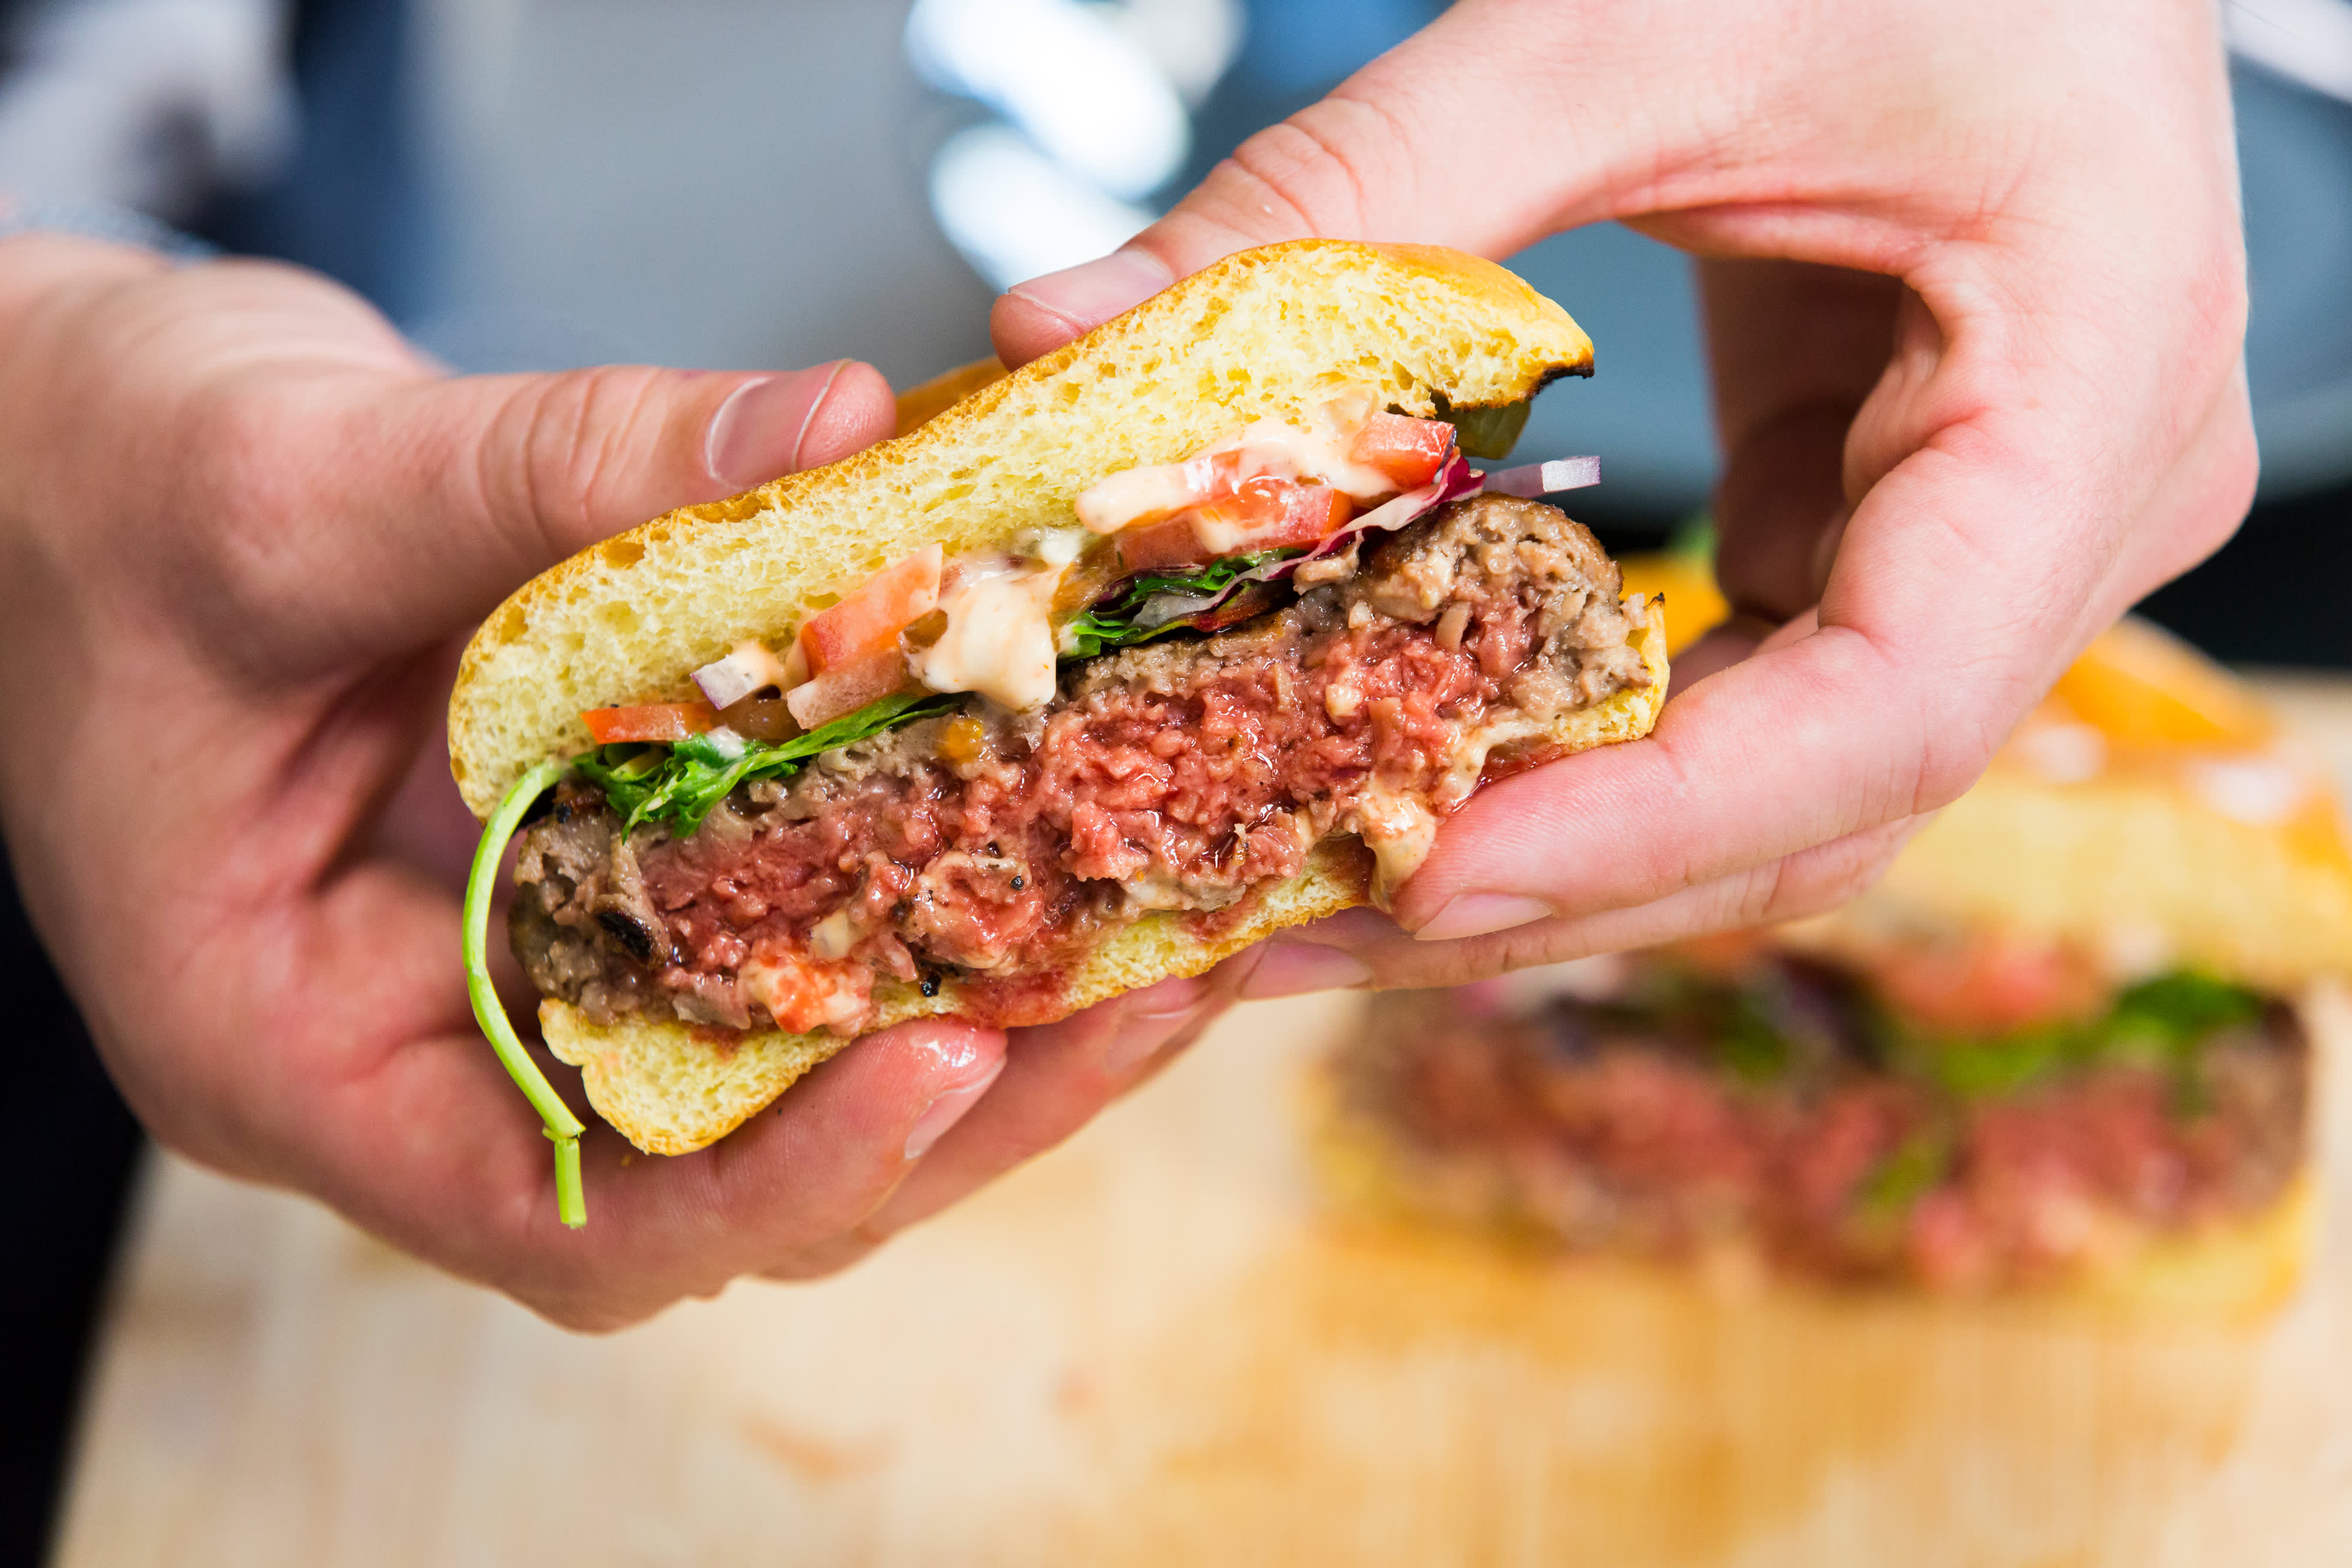 Impossible Foods cuts prices for foodservice distributors by an average of 15%